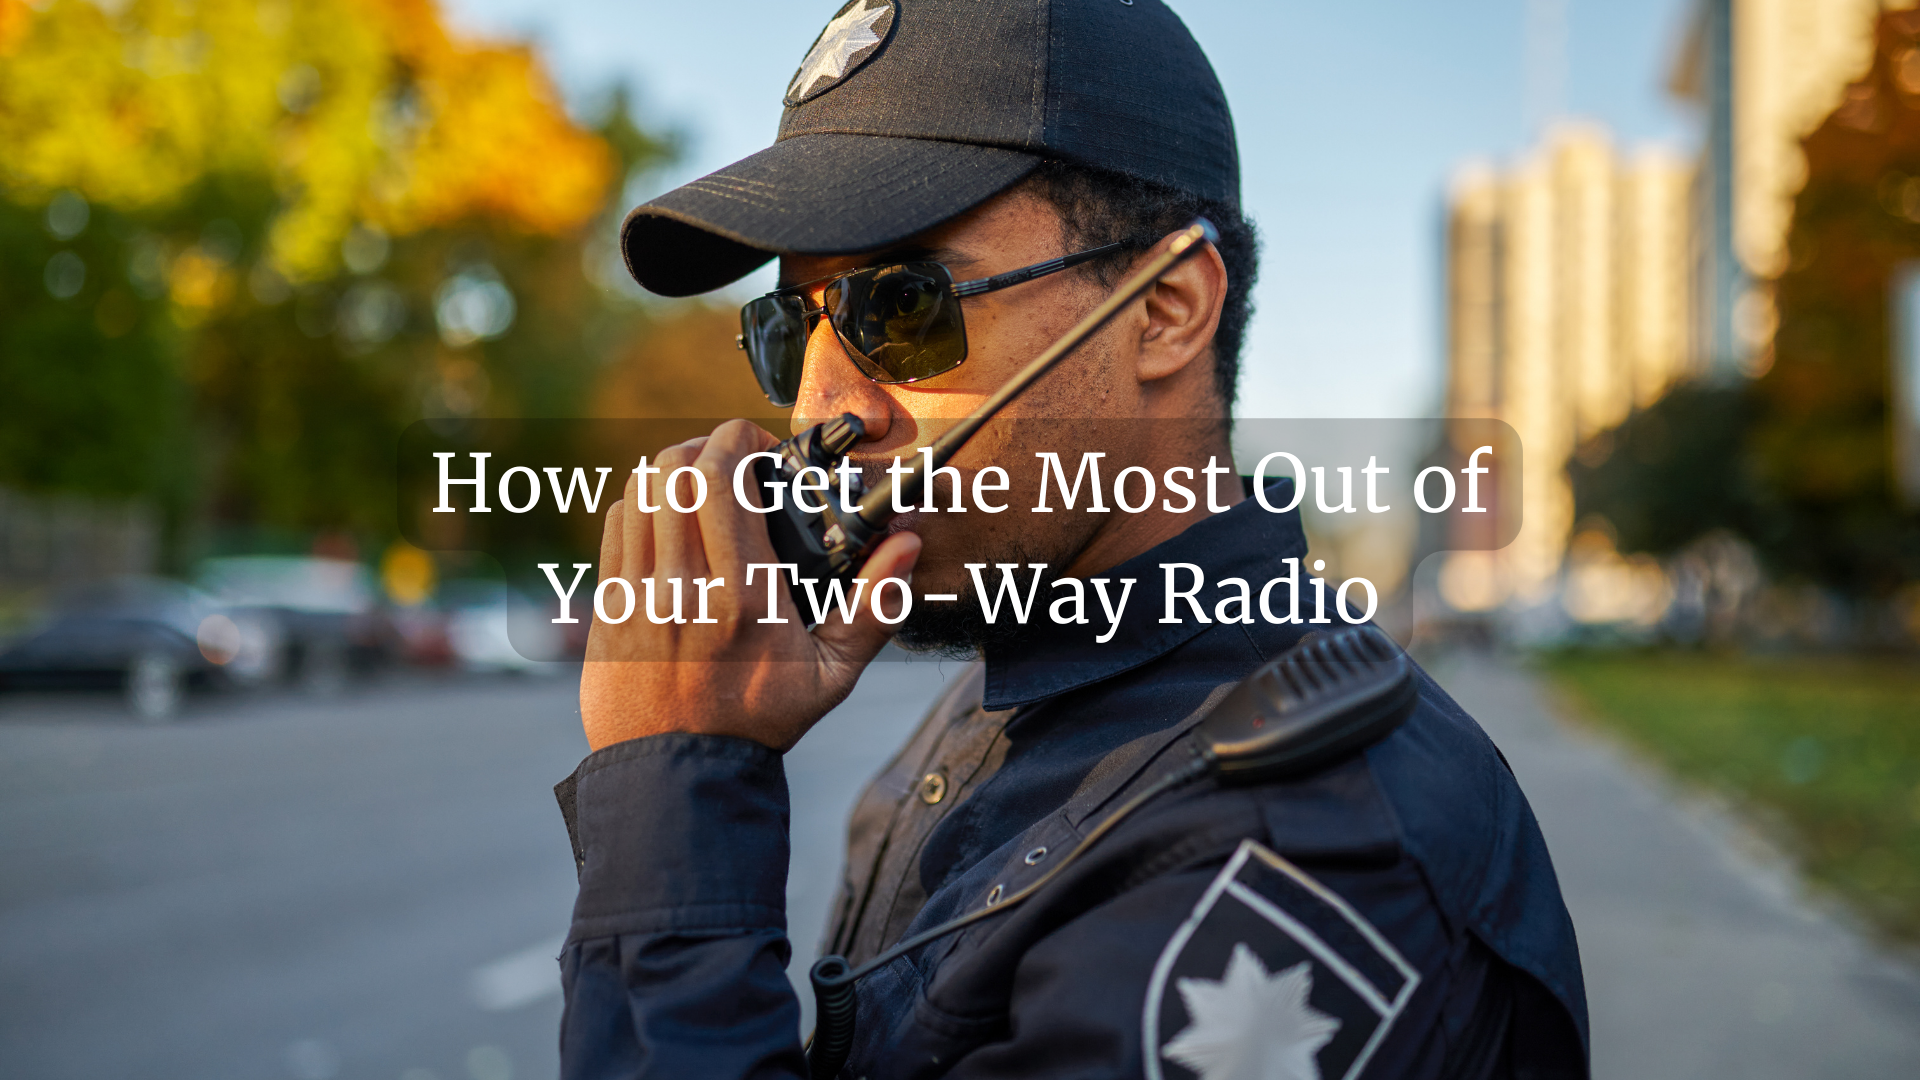 How to Get the Most Out of Your Two-Way Radio